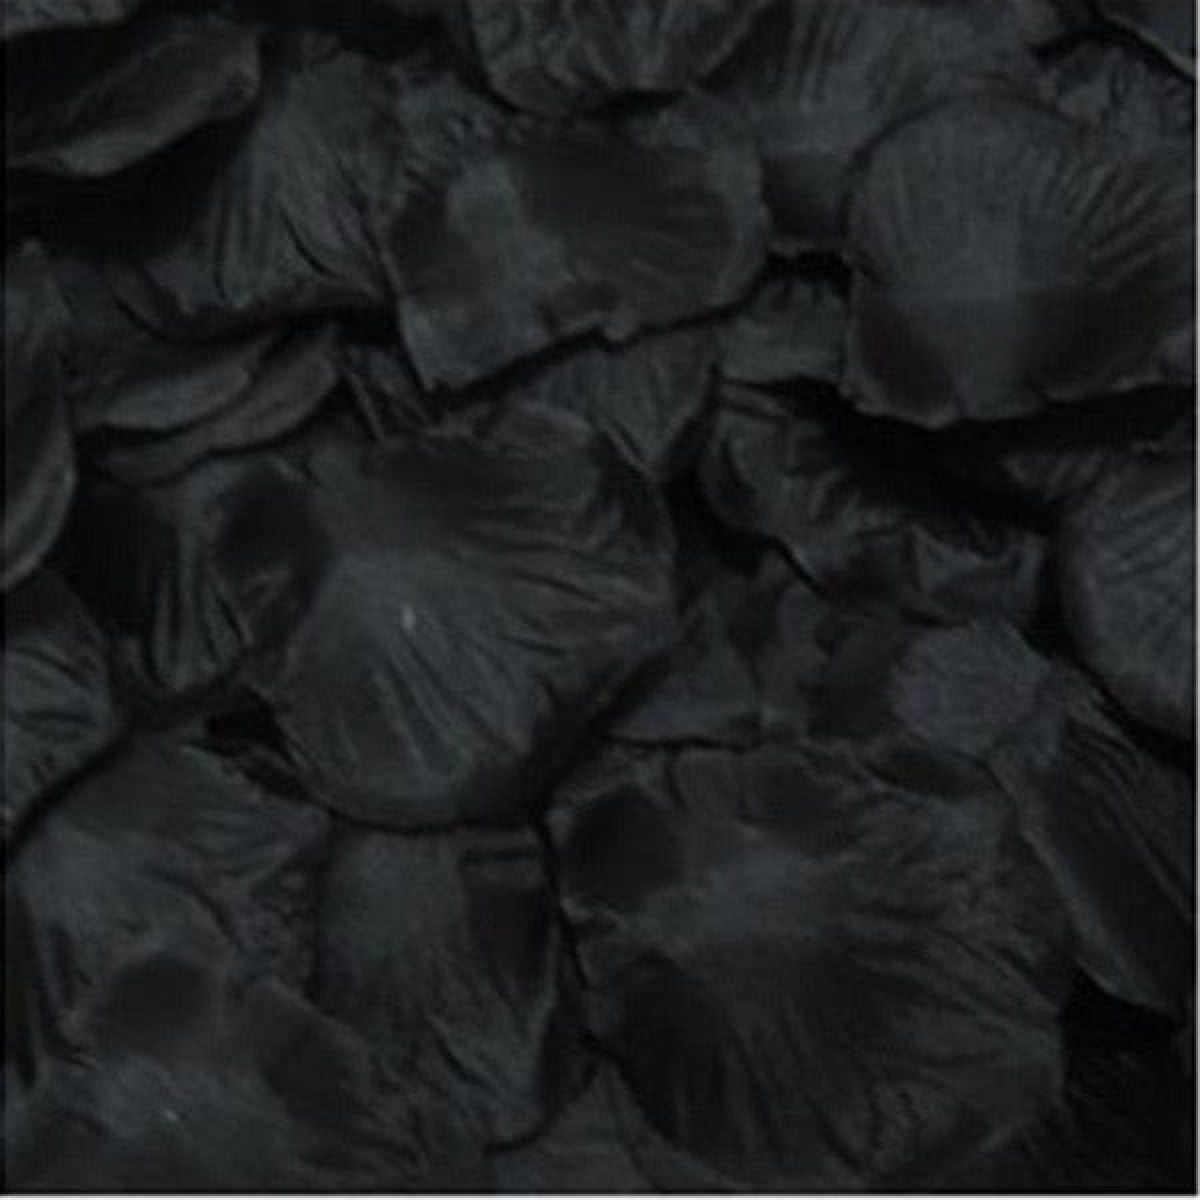 500pcs Rose Petals Flower Artificial Flowers Table Confetti Home Wedding Decorations - Black - - Asia Sell